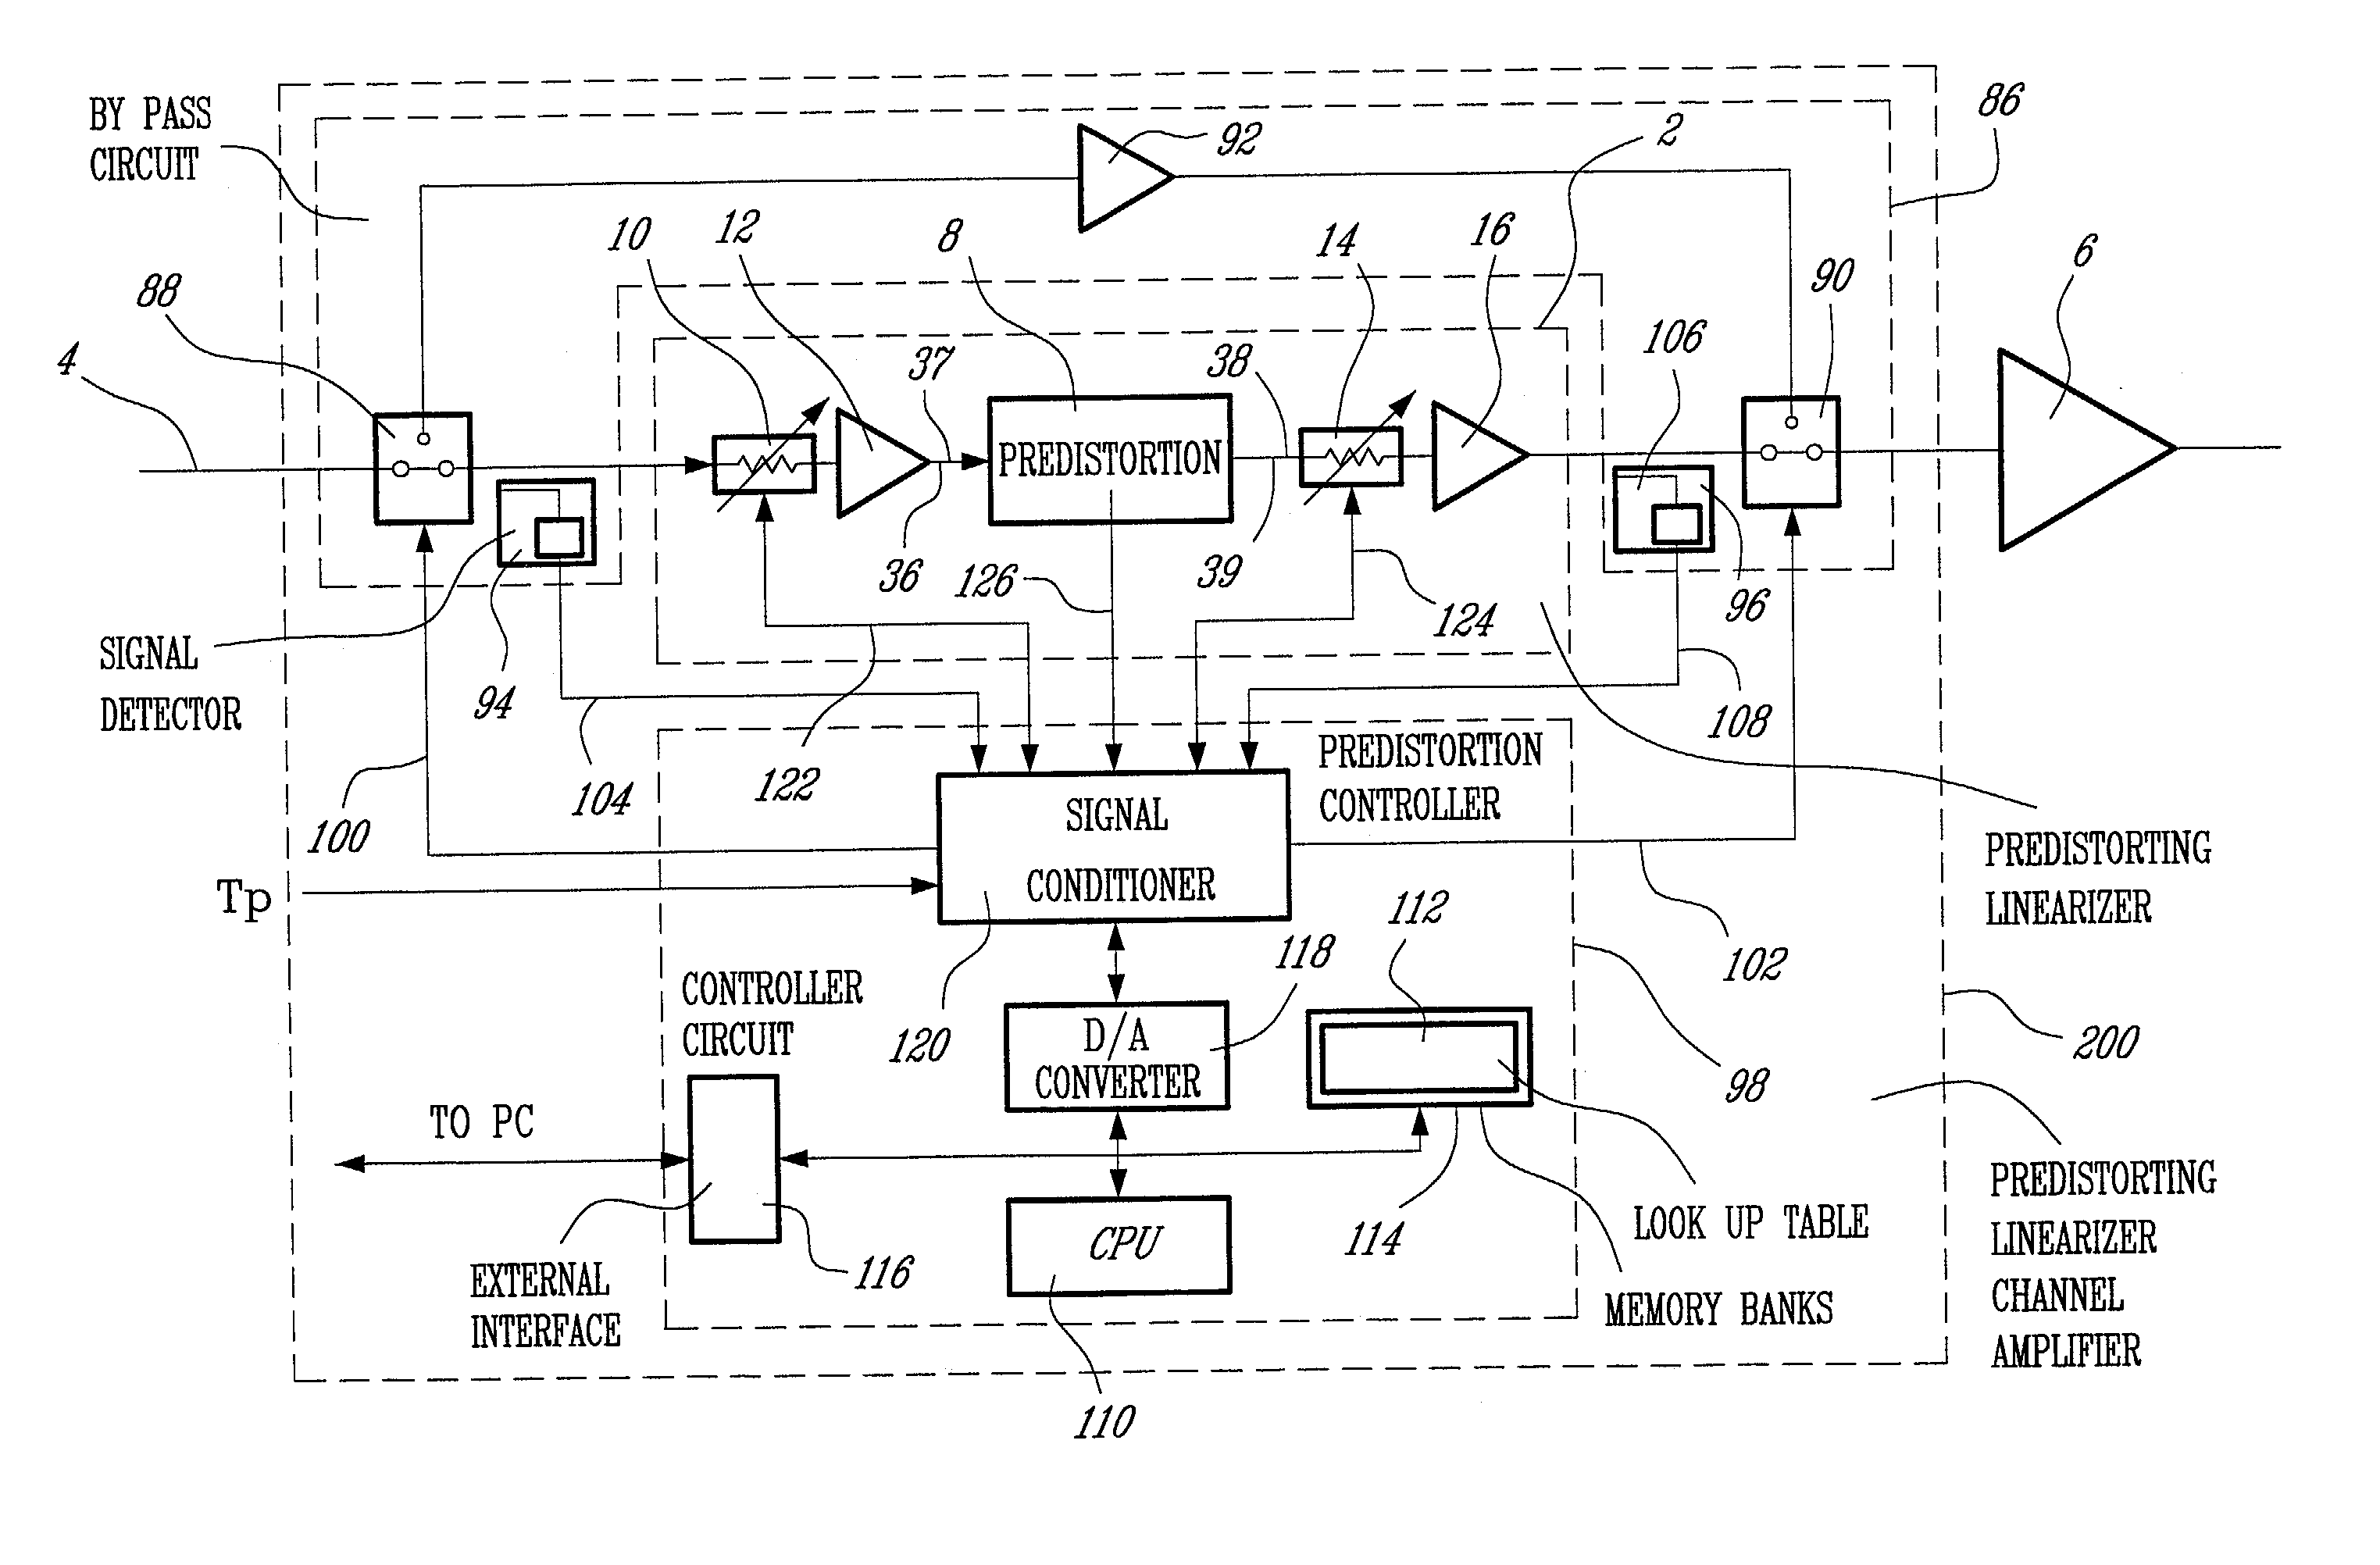 Active predistorting linearizer with agile bypass circuit for safe mode operation